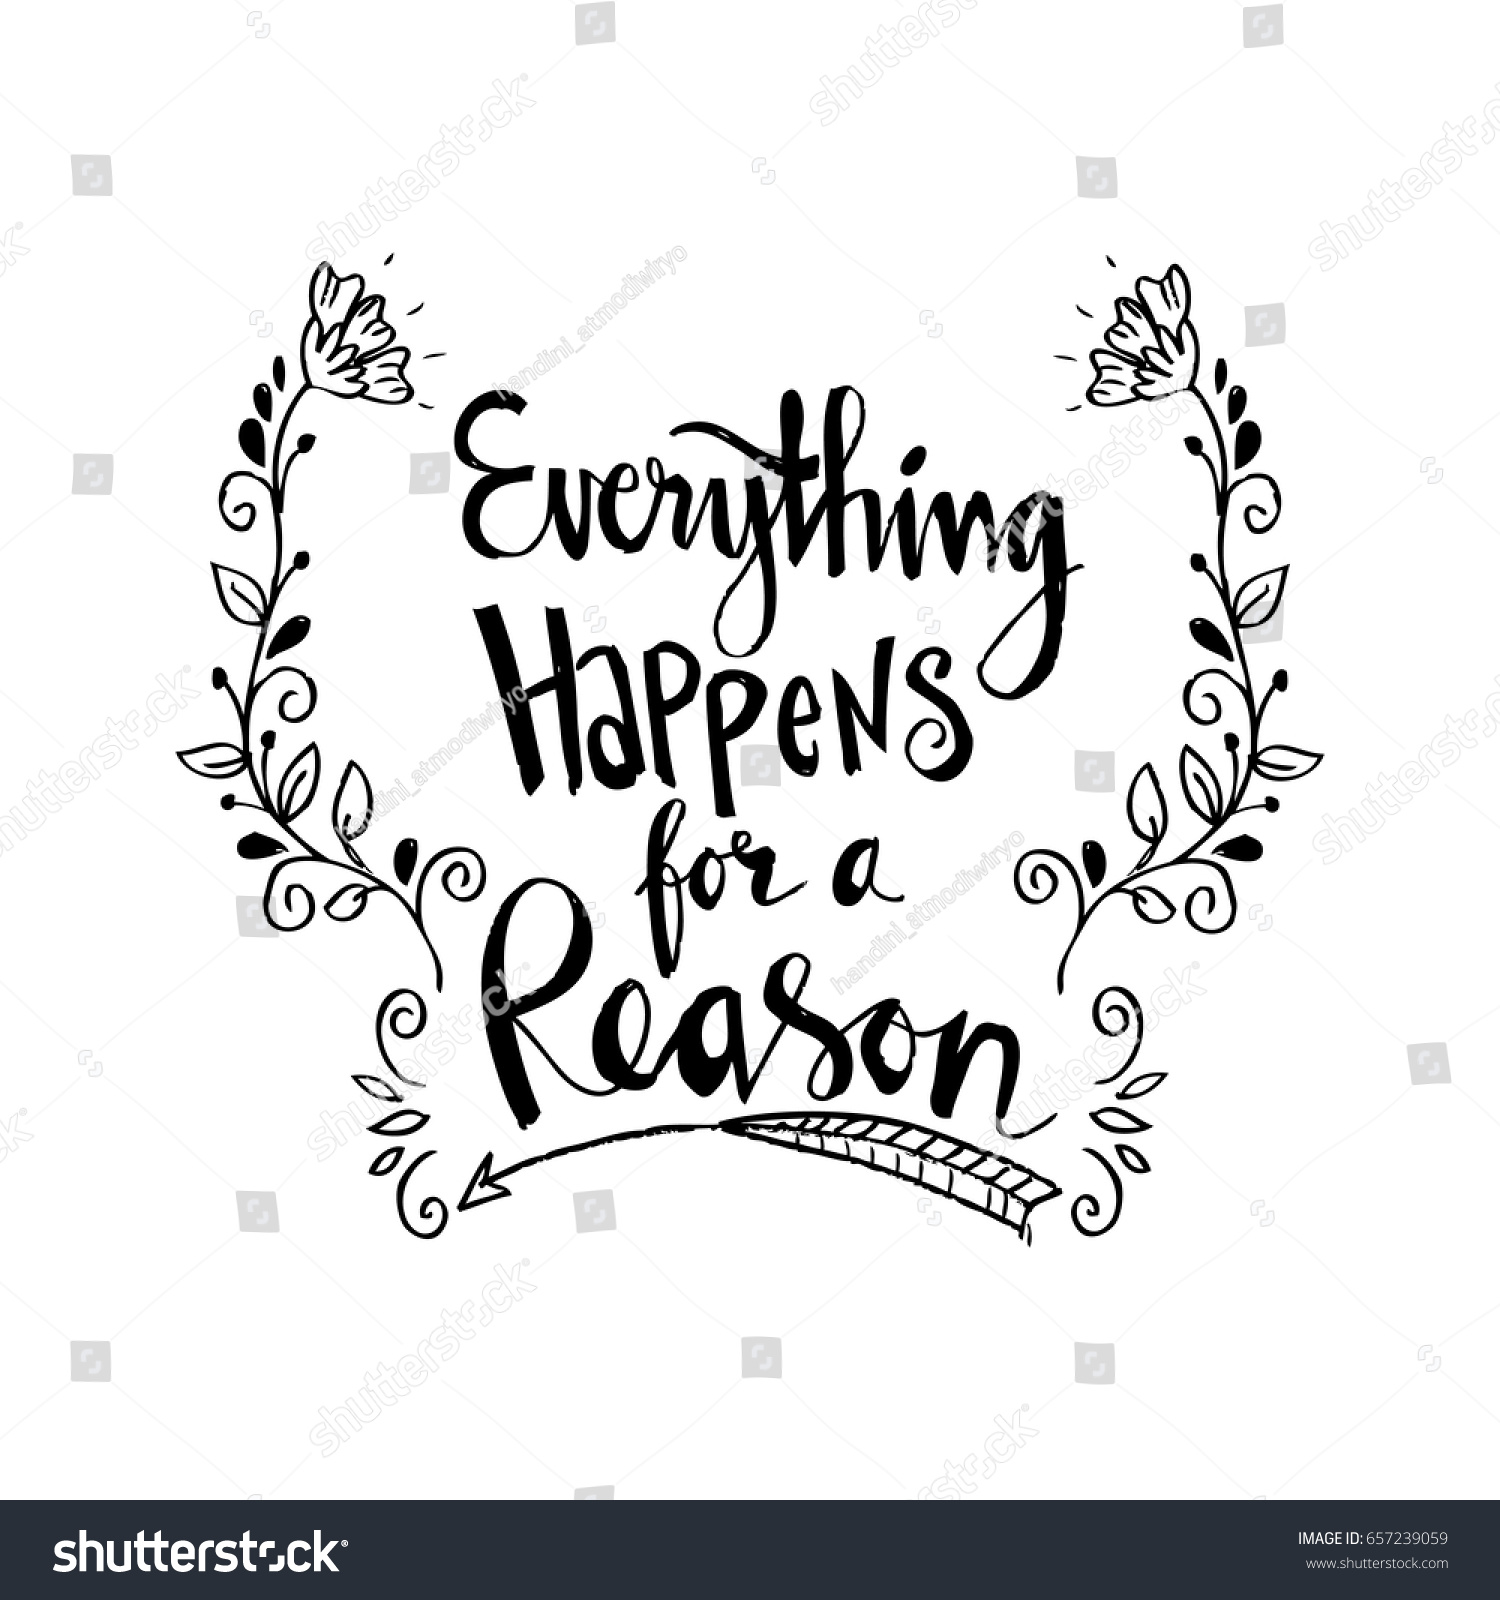 Everything happens for a reason Images, Stock Photos & Vectors ...